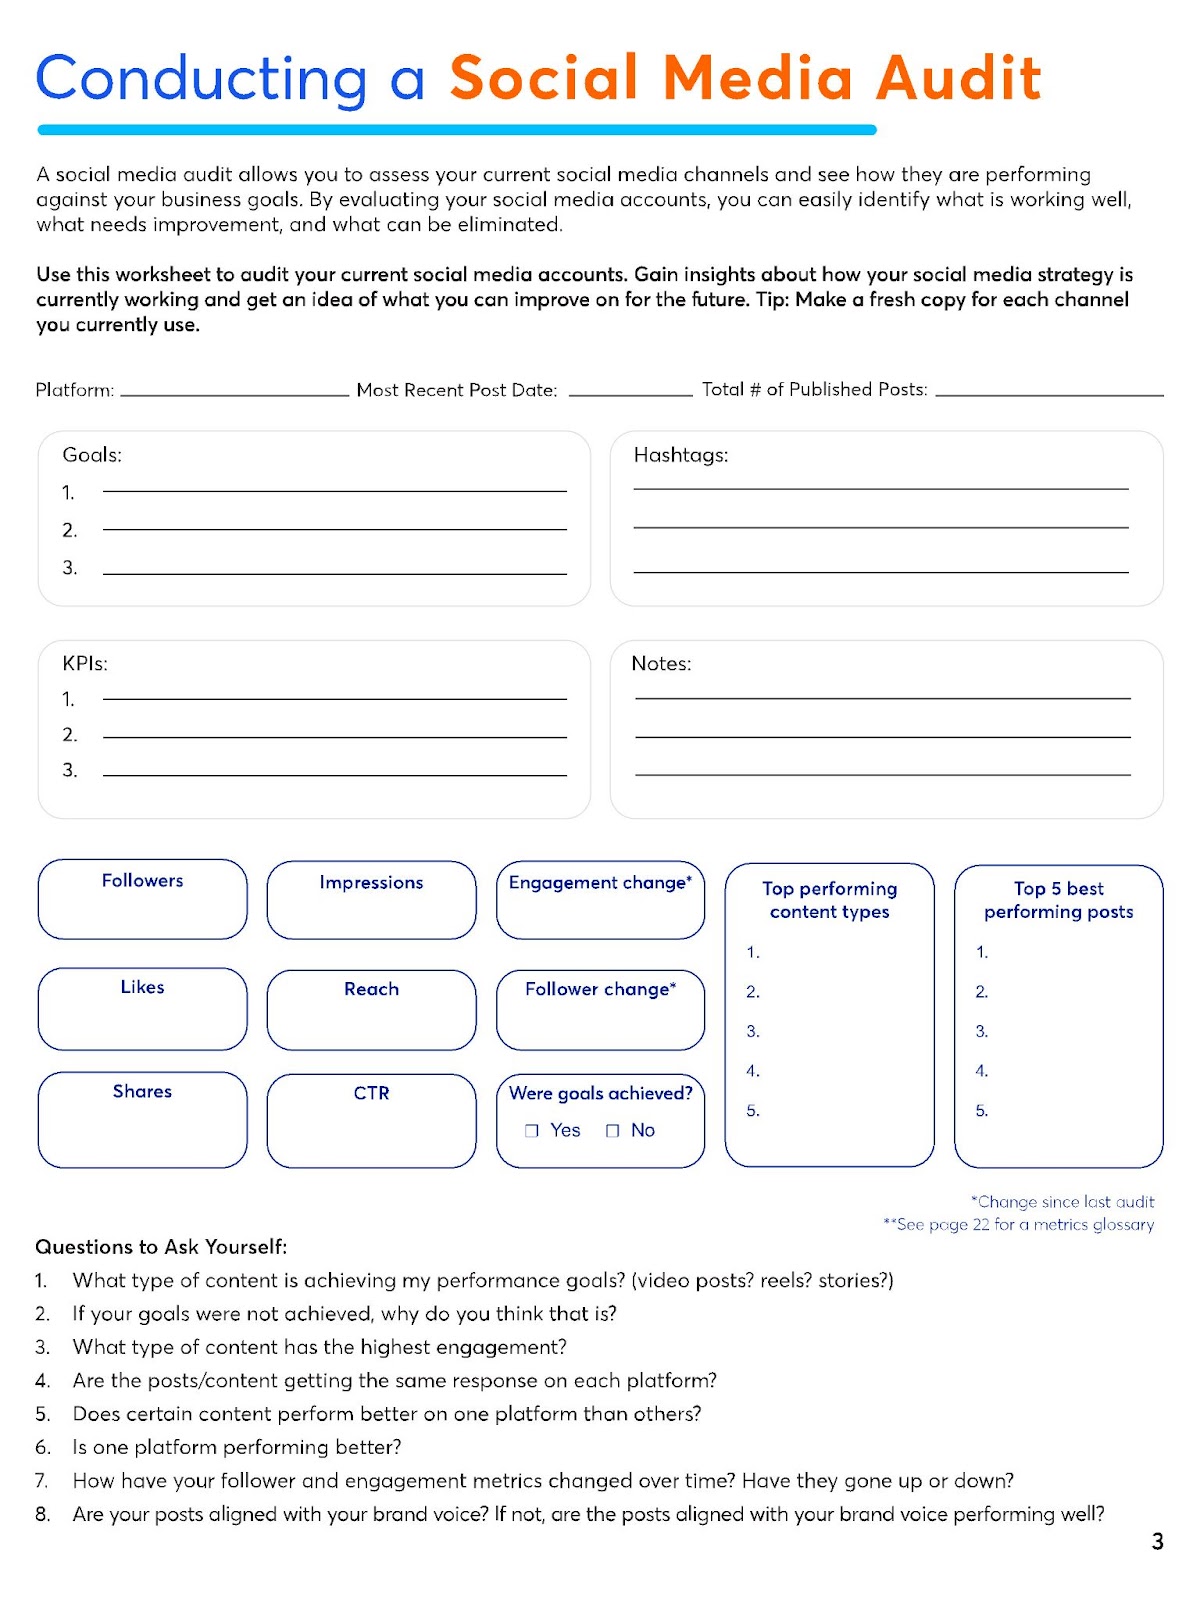 Social media audit worksheet from Constant contact